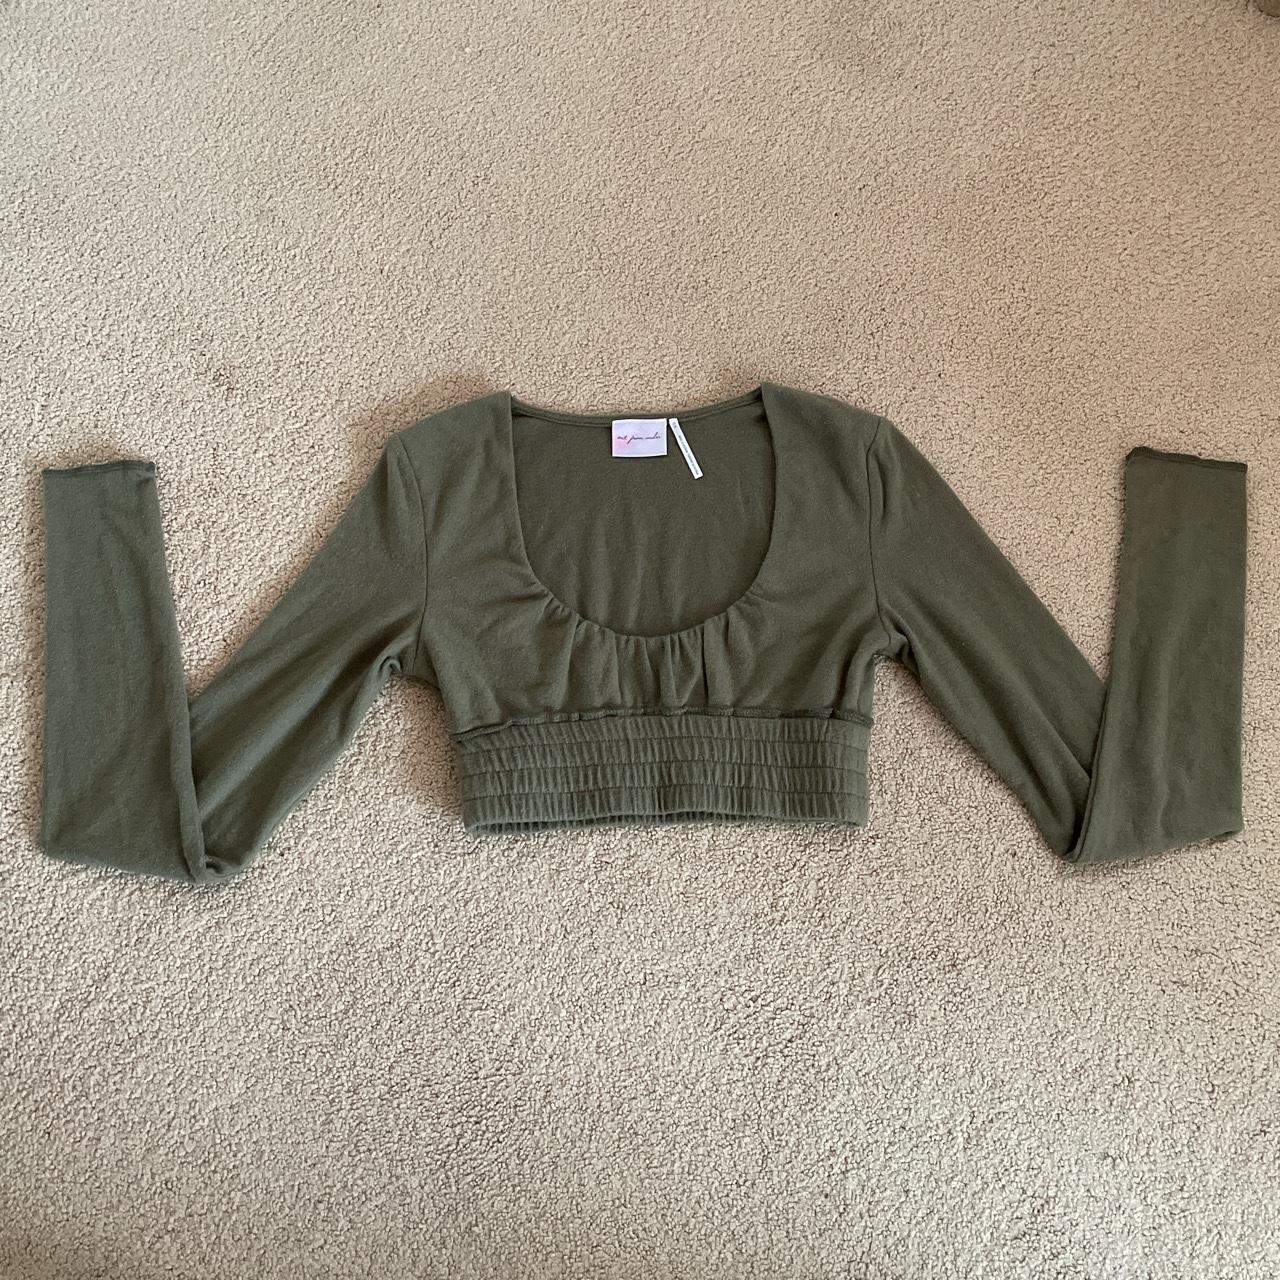 item listed by angesthriftedcloset